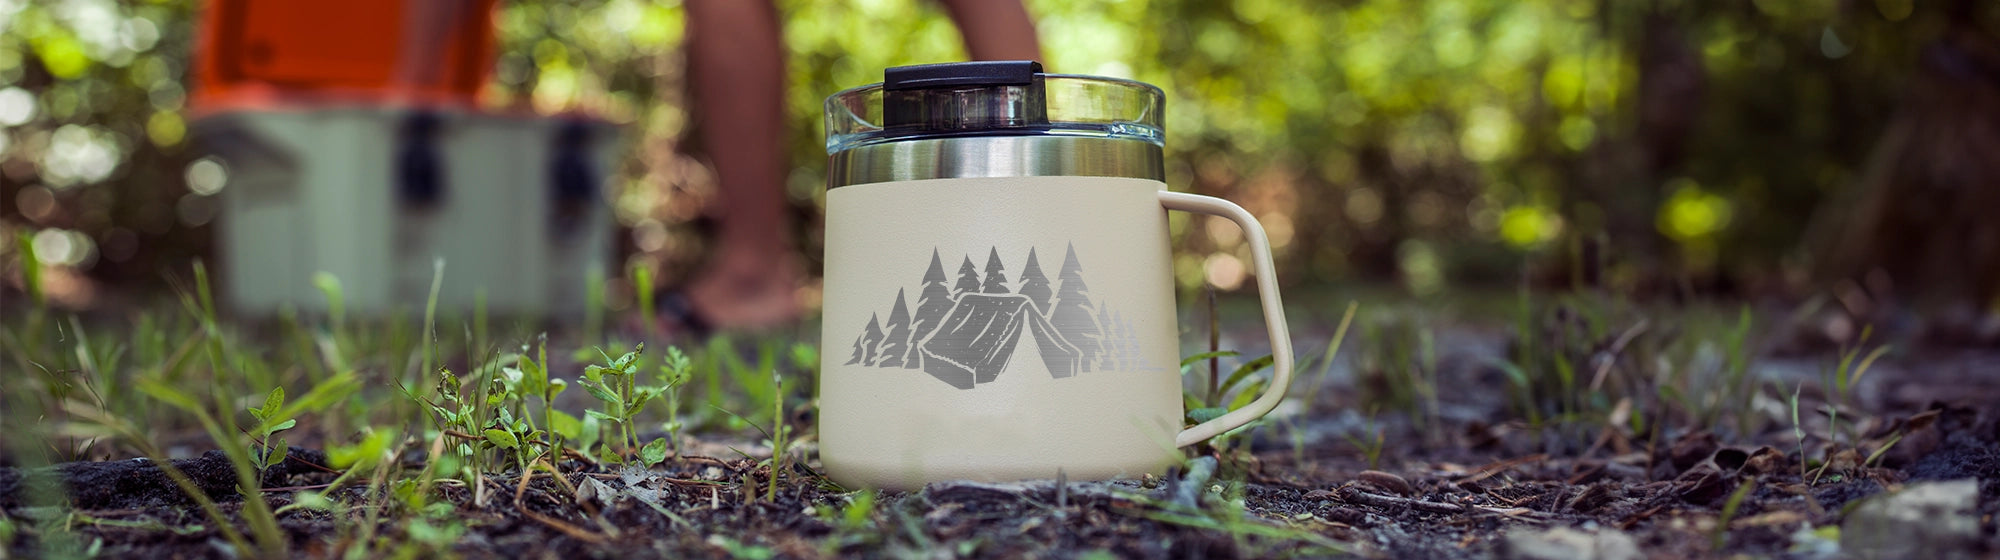 coffee mug in a camp setting with a custom laser engraving of a tent